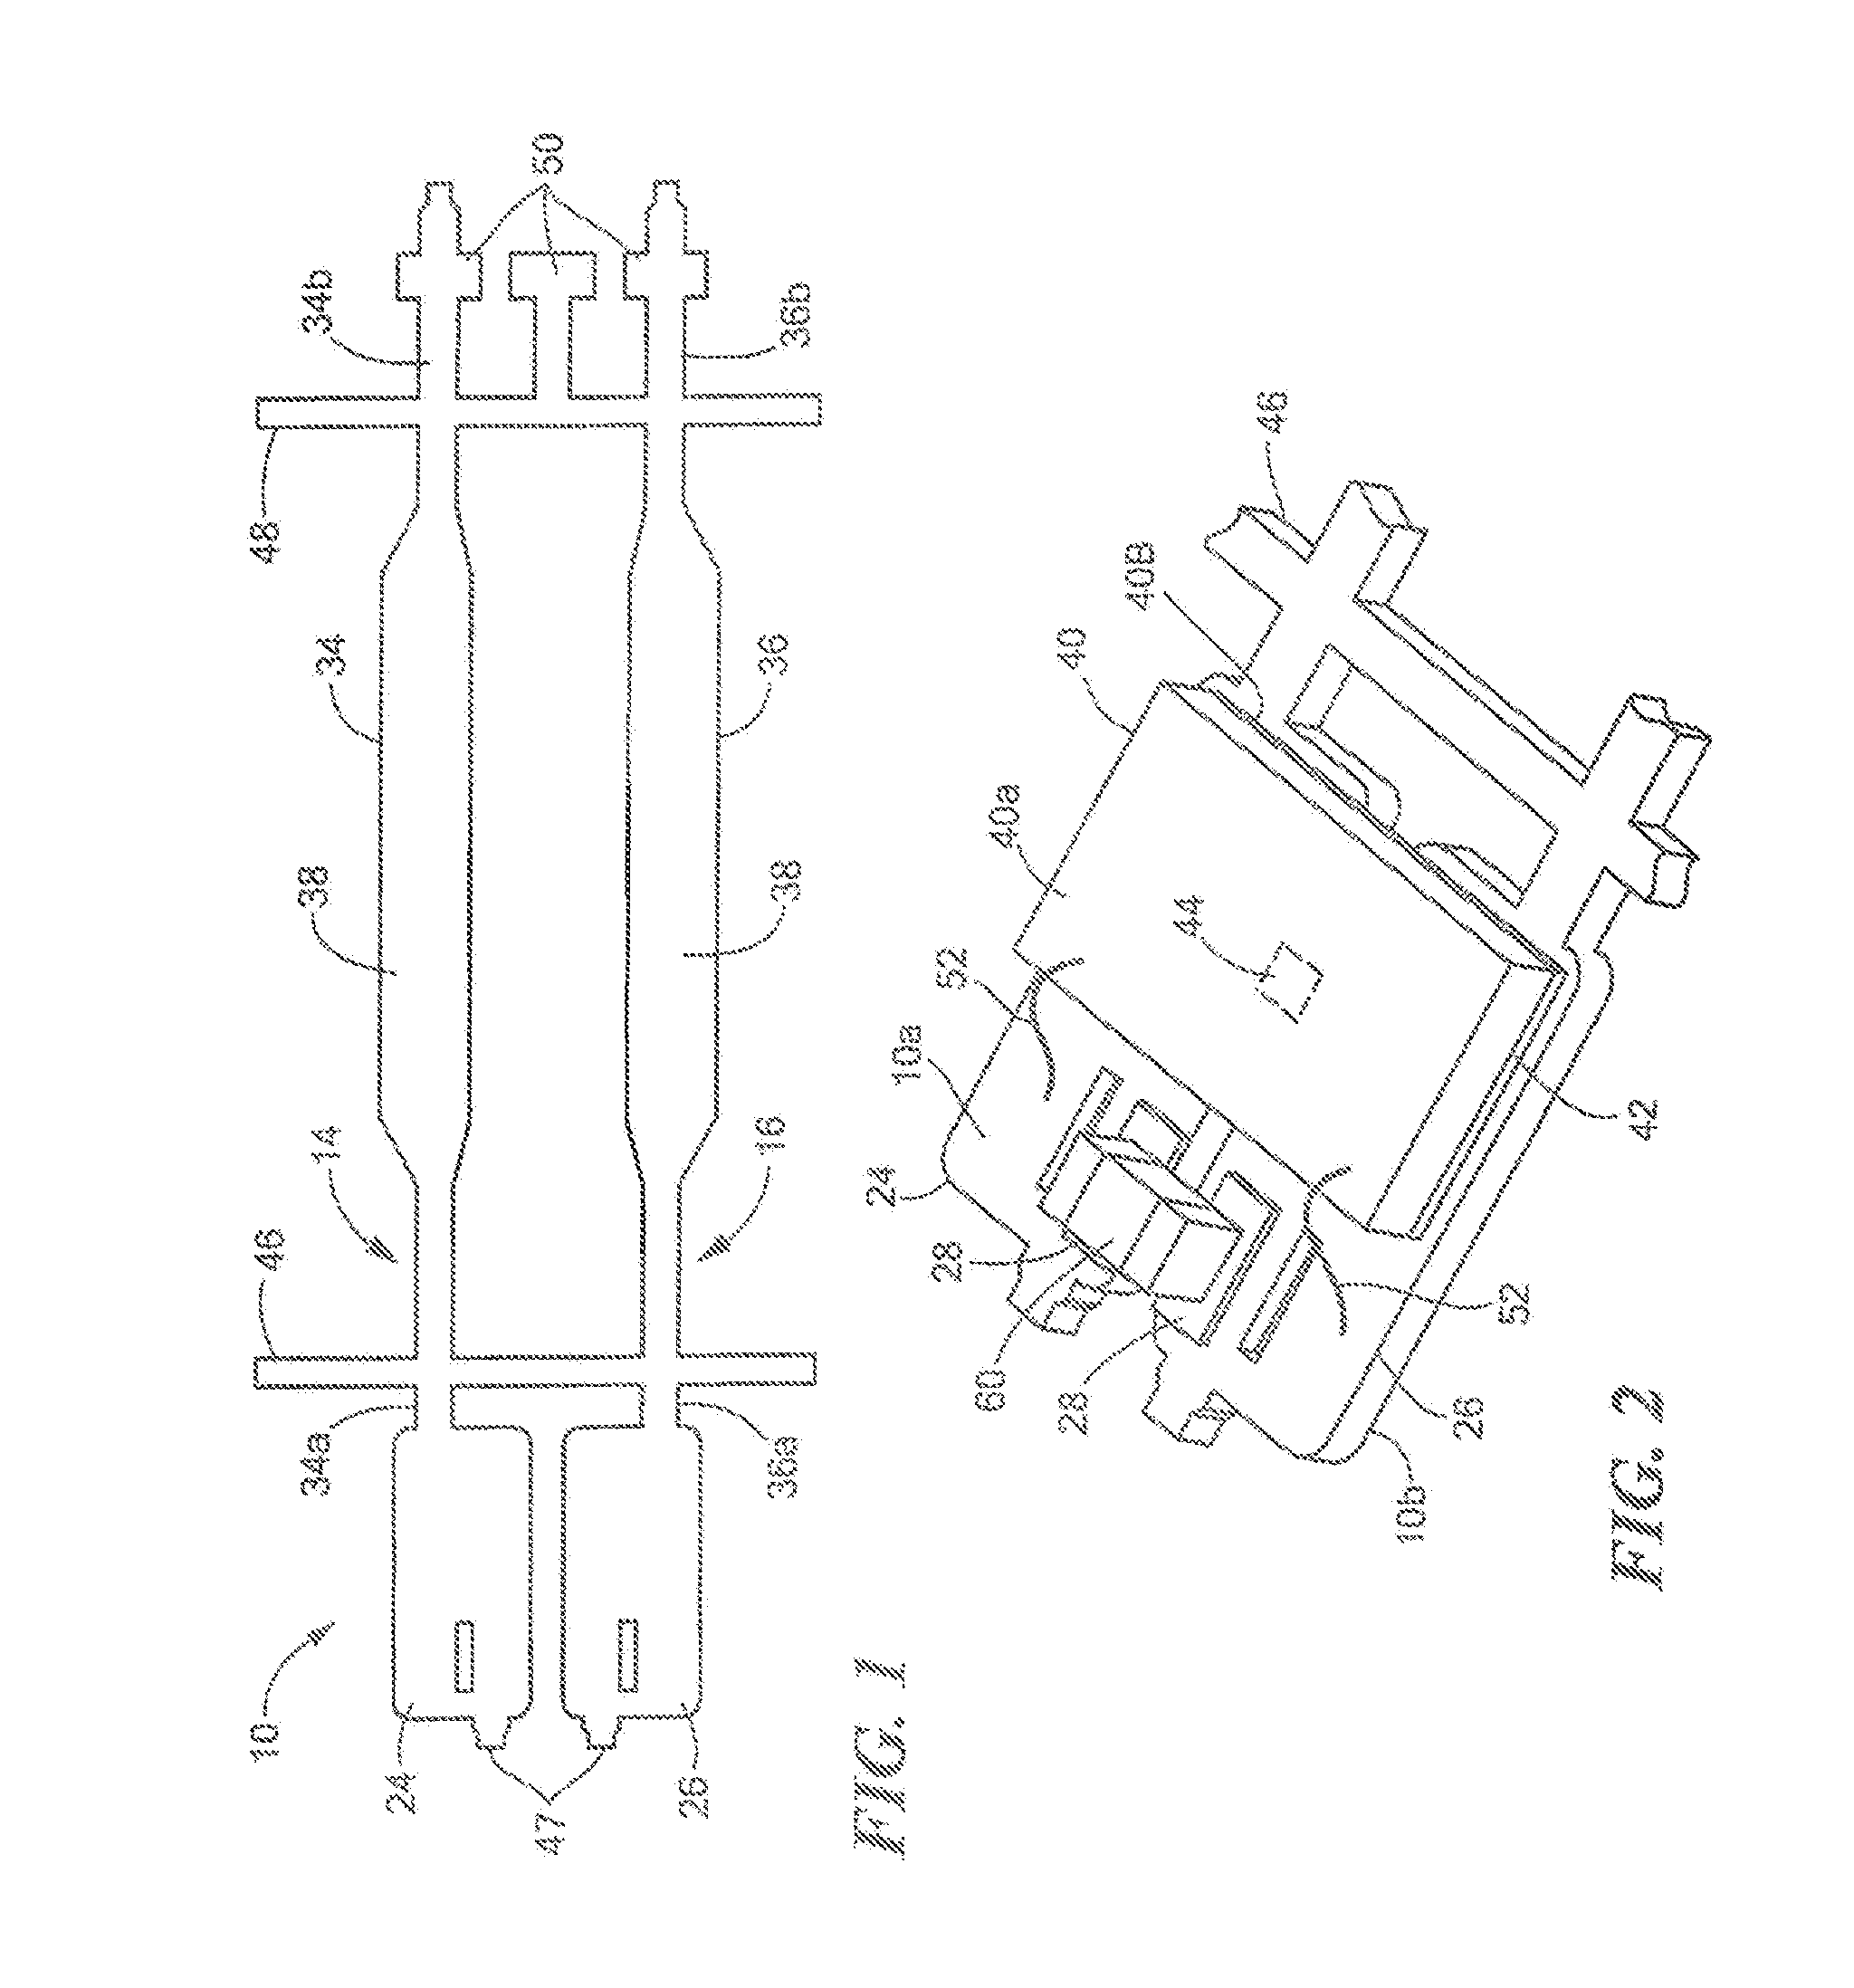 Integrated circuit package having a split lead frame